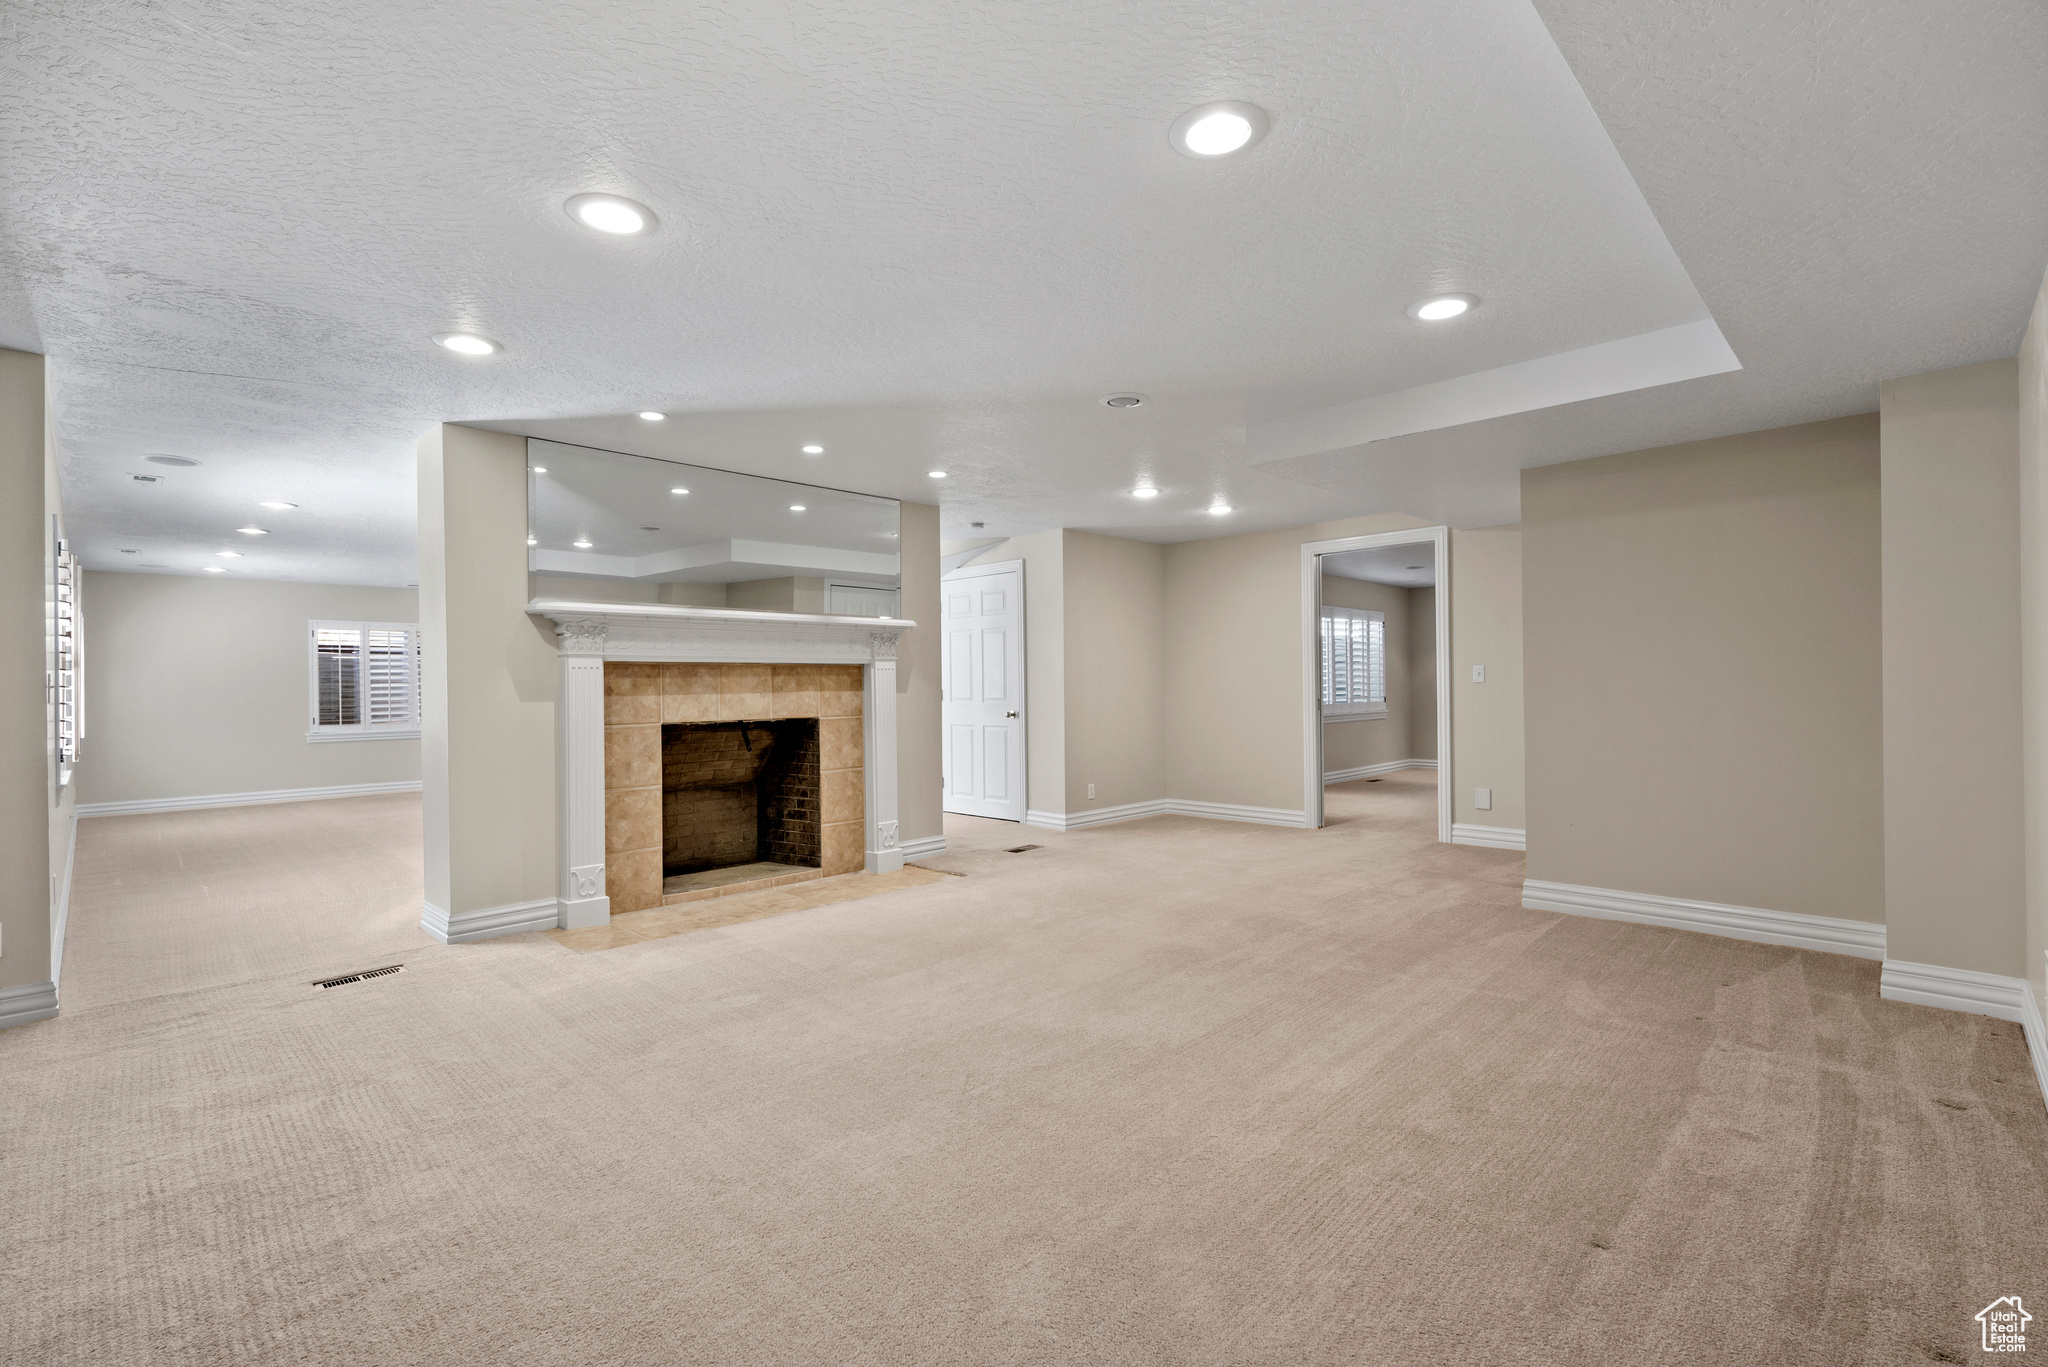 Unfurnished living room with plenty of natural light, light carpet, a tiled fireplace, and a textured ceiling